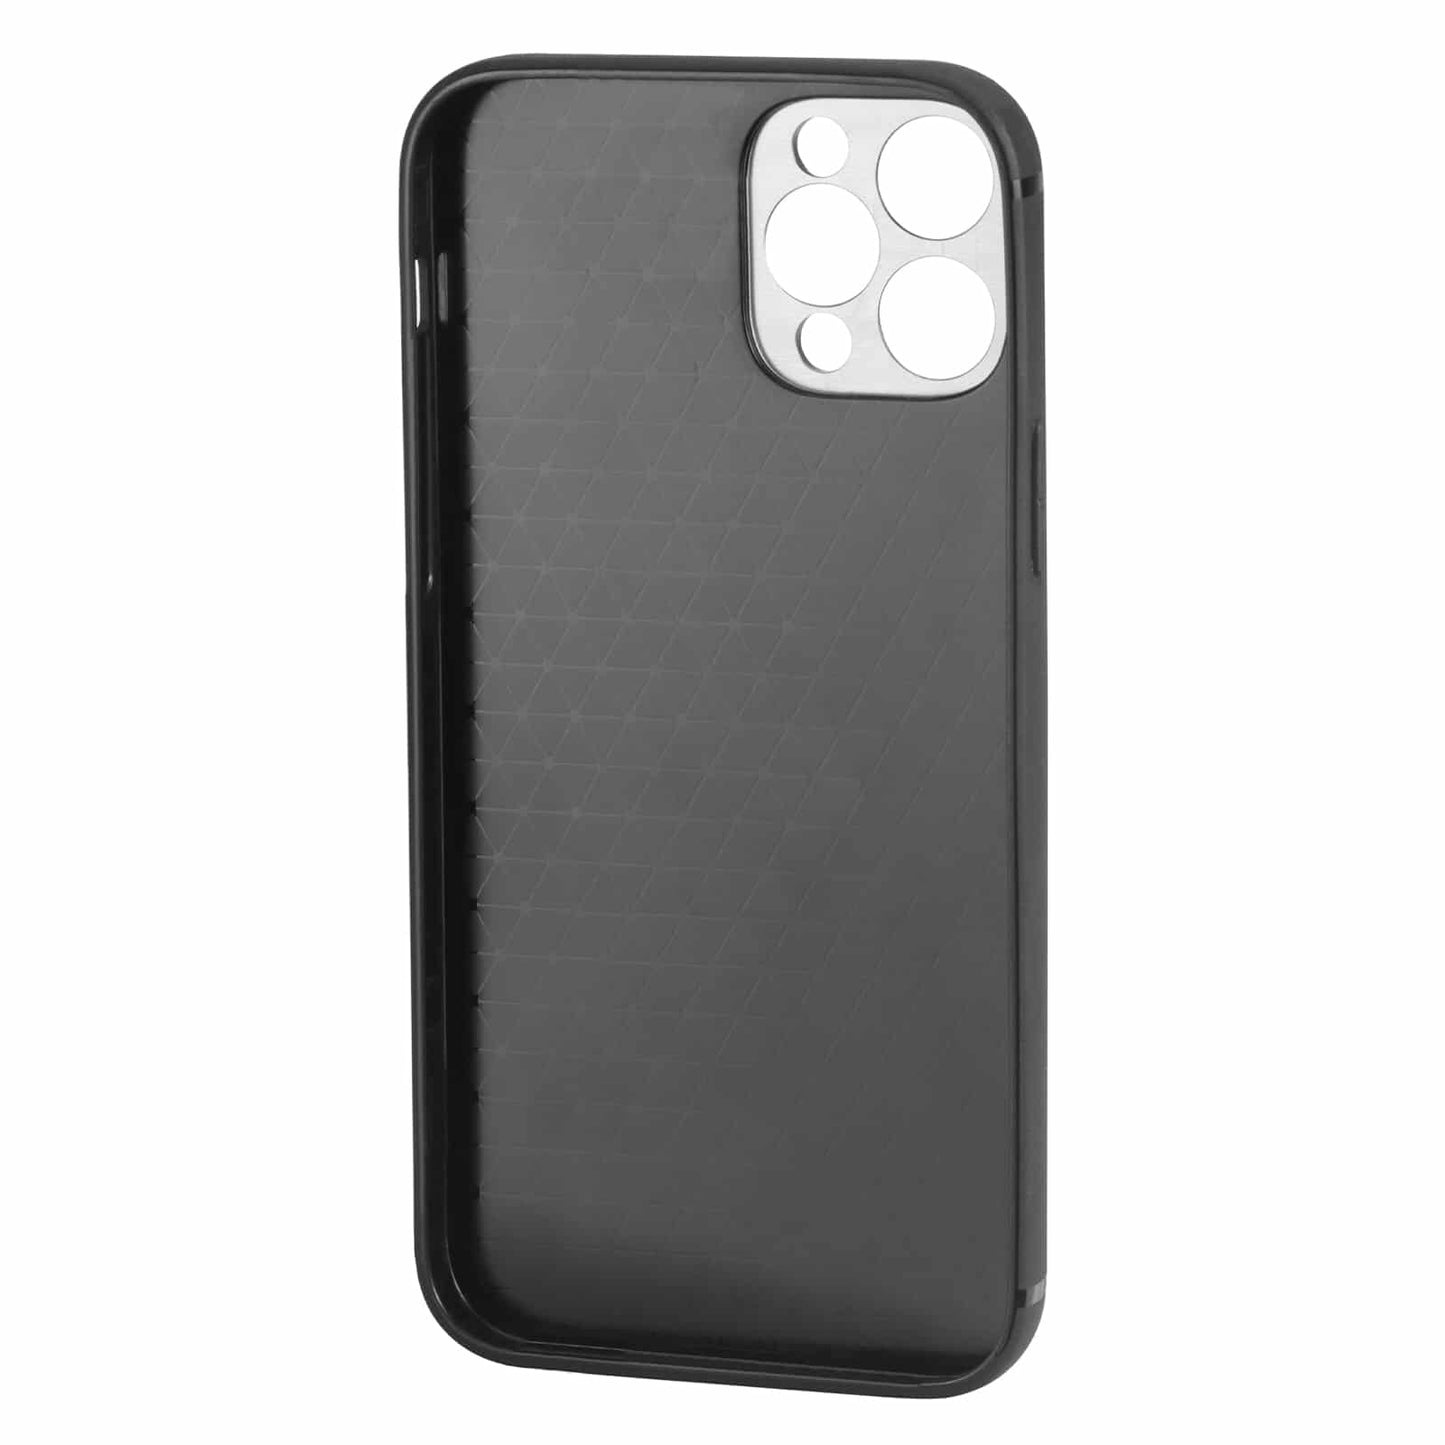 Ulanzi iPhone 12 Pro lens case with 17mm thread